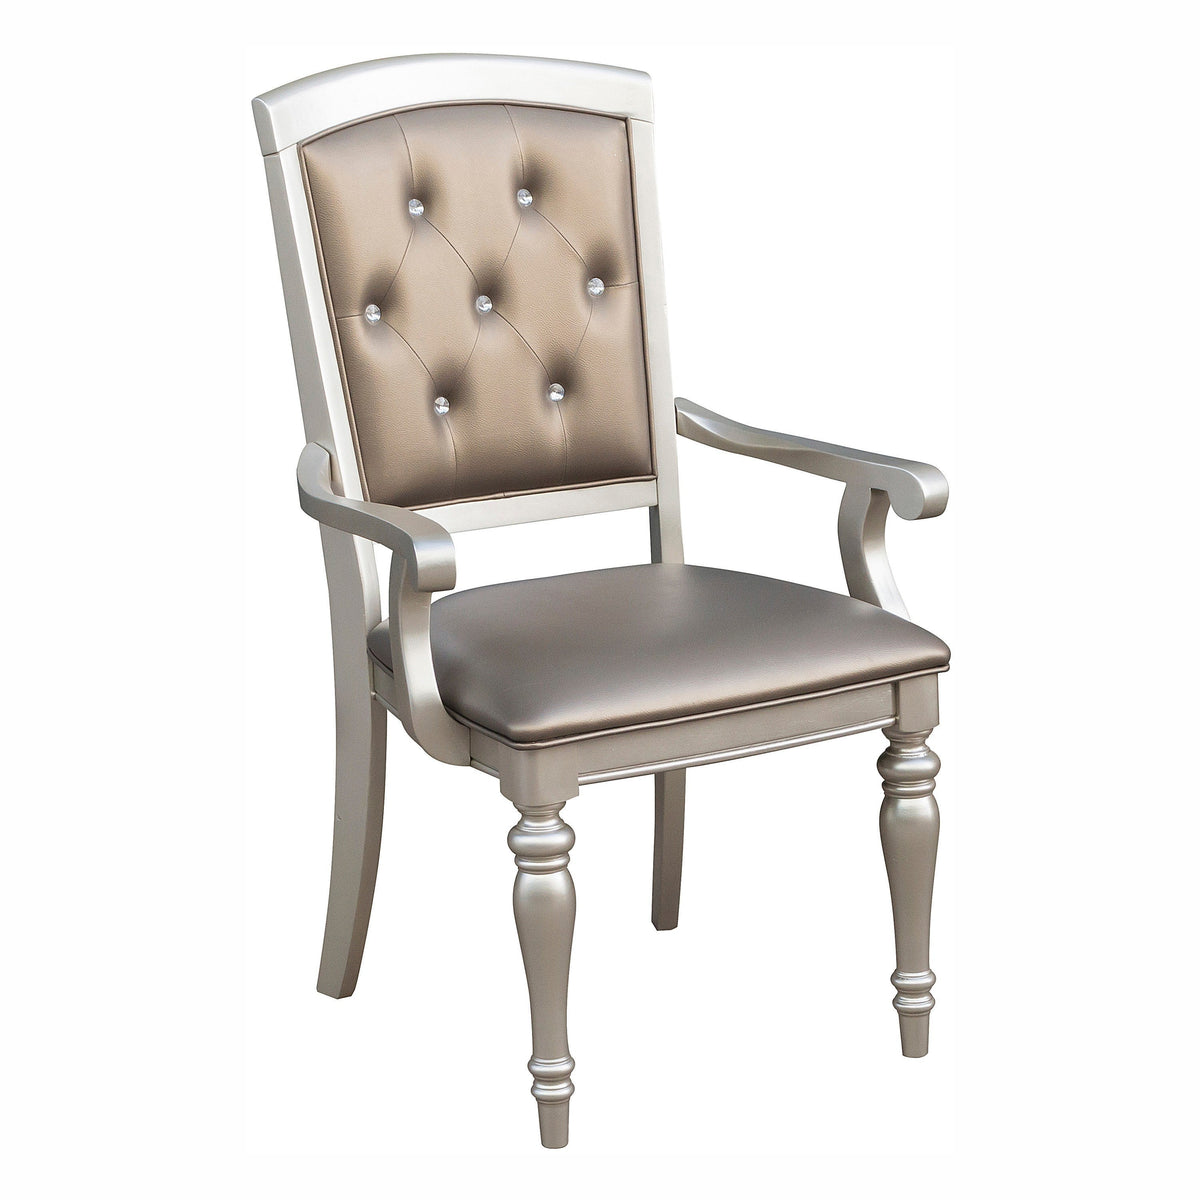  Homelegance Orsina Dining Chairs with Arm Luxurious Design  with Crystal Button Tufting, Set of 2, Pearl - Chairs